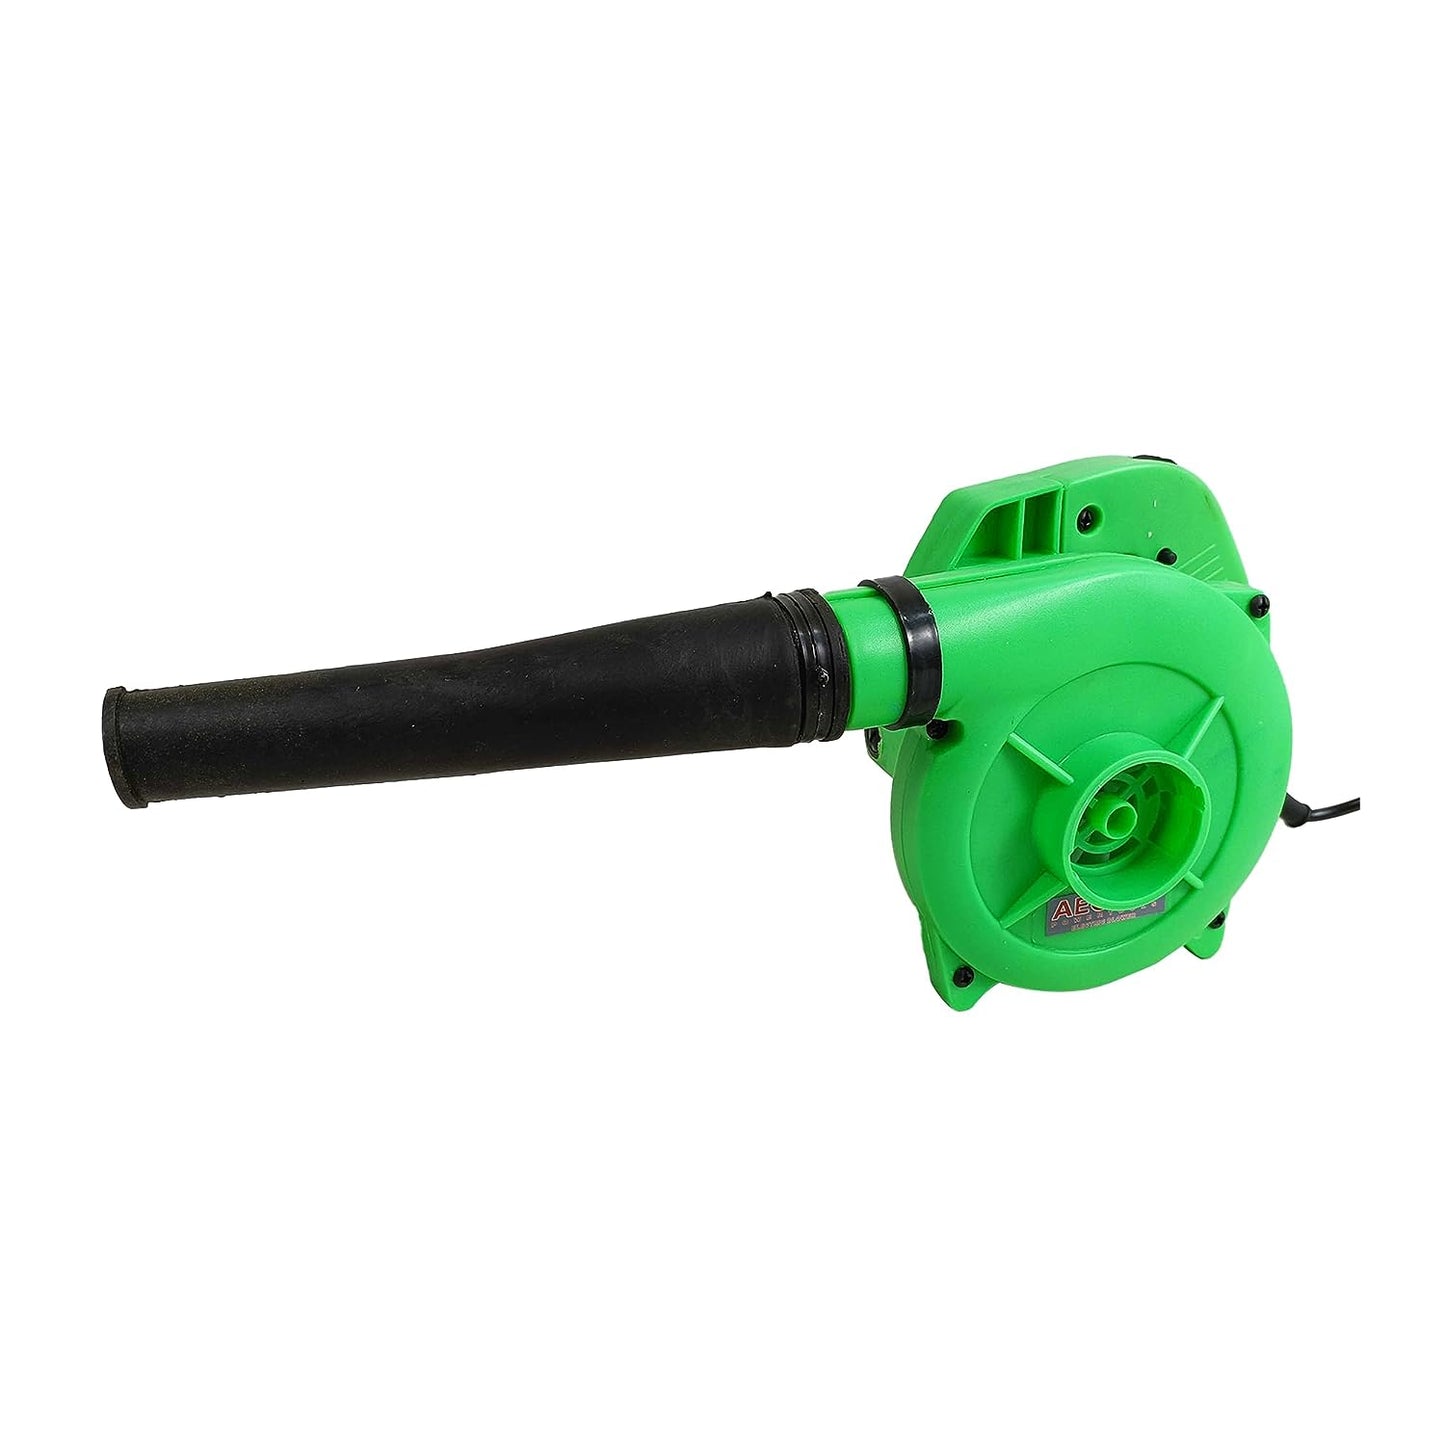 Aegon AB40 Multipurpose Electric Air Blower for Home, Office, Dust Cleaner/Garden Leaf/Trash Cleaning (550W, 3.8 m3/min, 14000 RPM, Green)